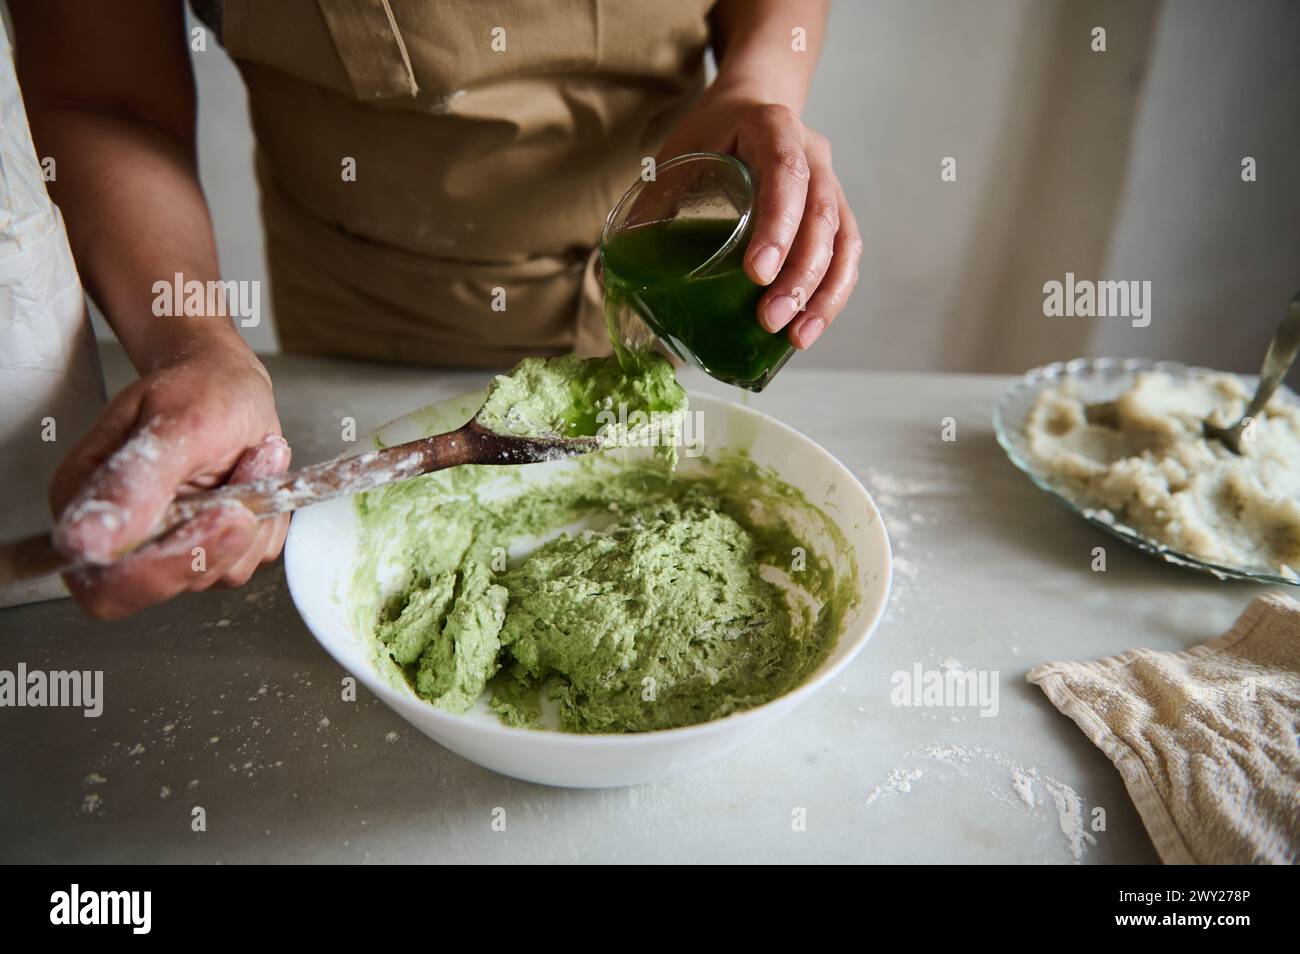 Close-up hands of a chef pastry, housewife pouring green spinach water into a bowl with wheat four, making dough of green color for ravioli or dumplin Stock Photo